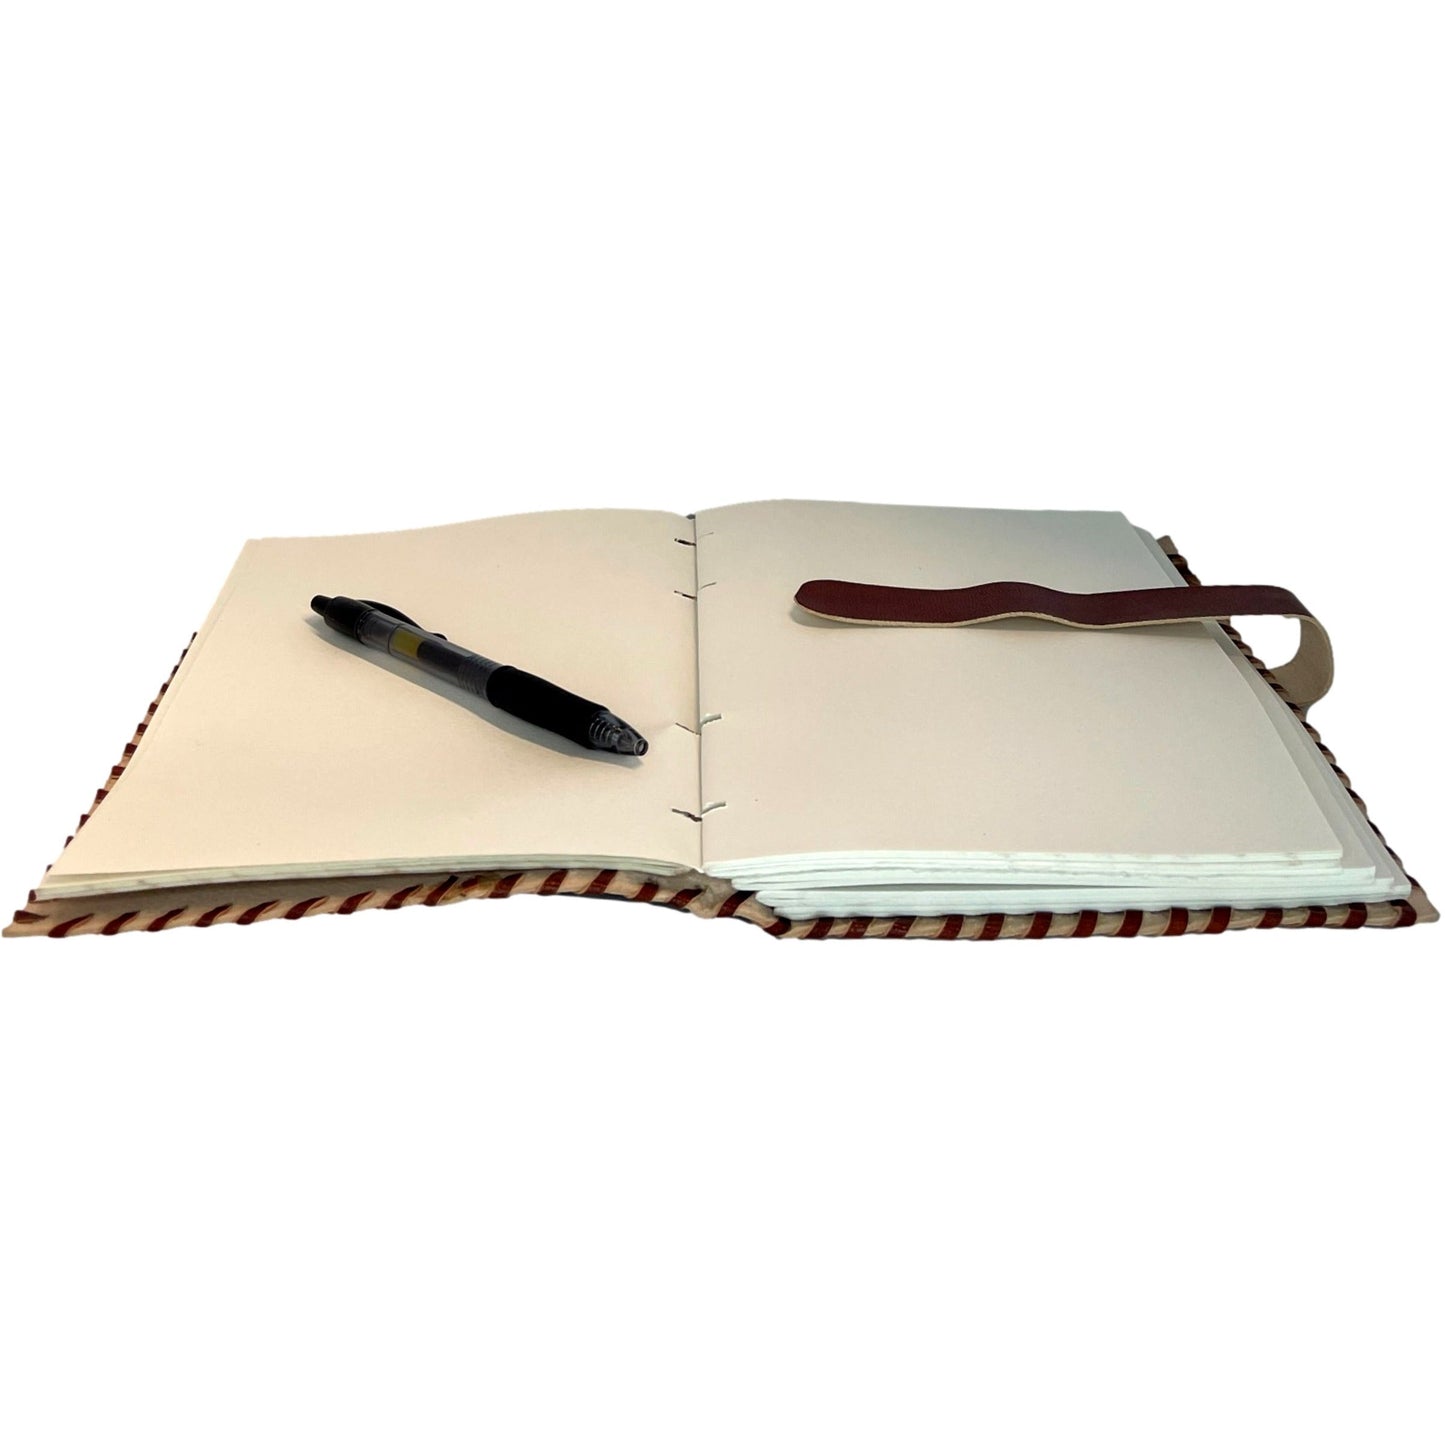 100% Leather Journal Embossed with Onyx Stone